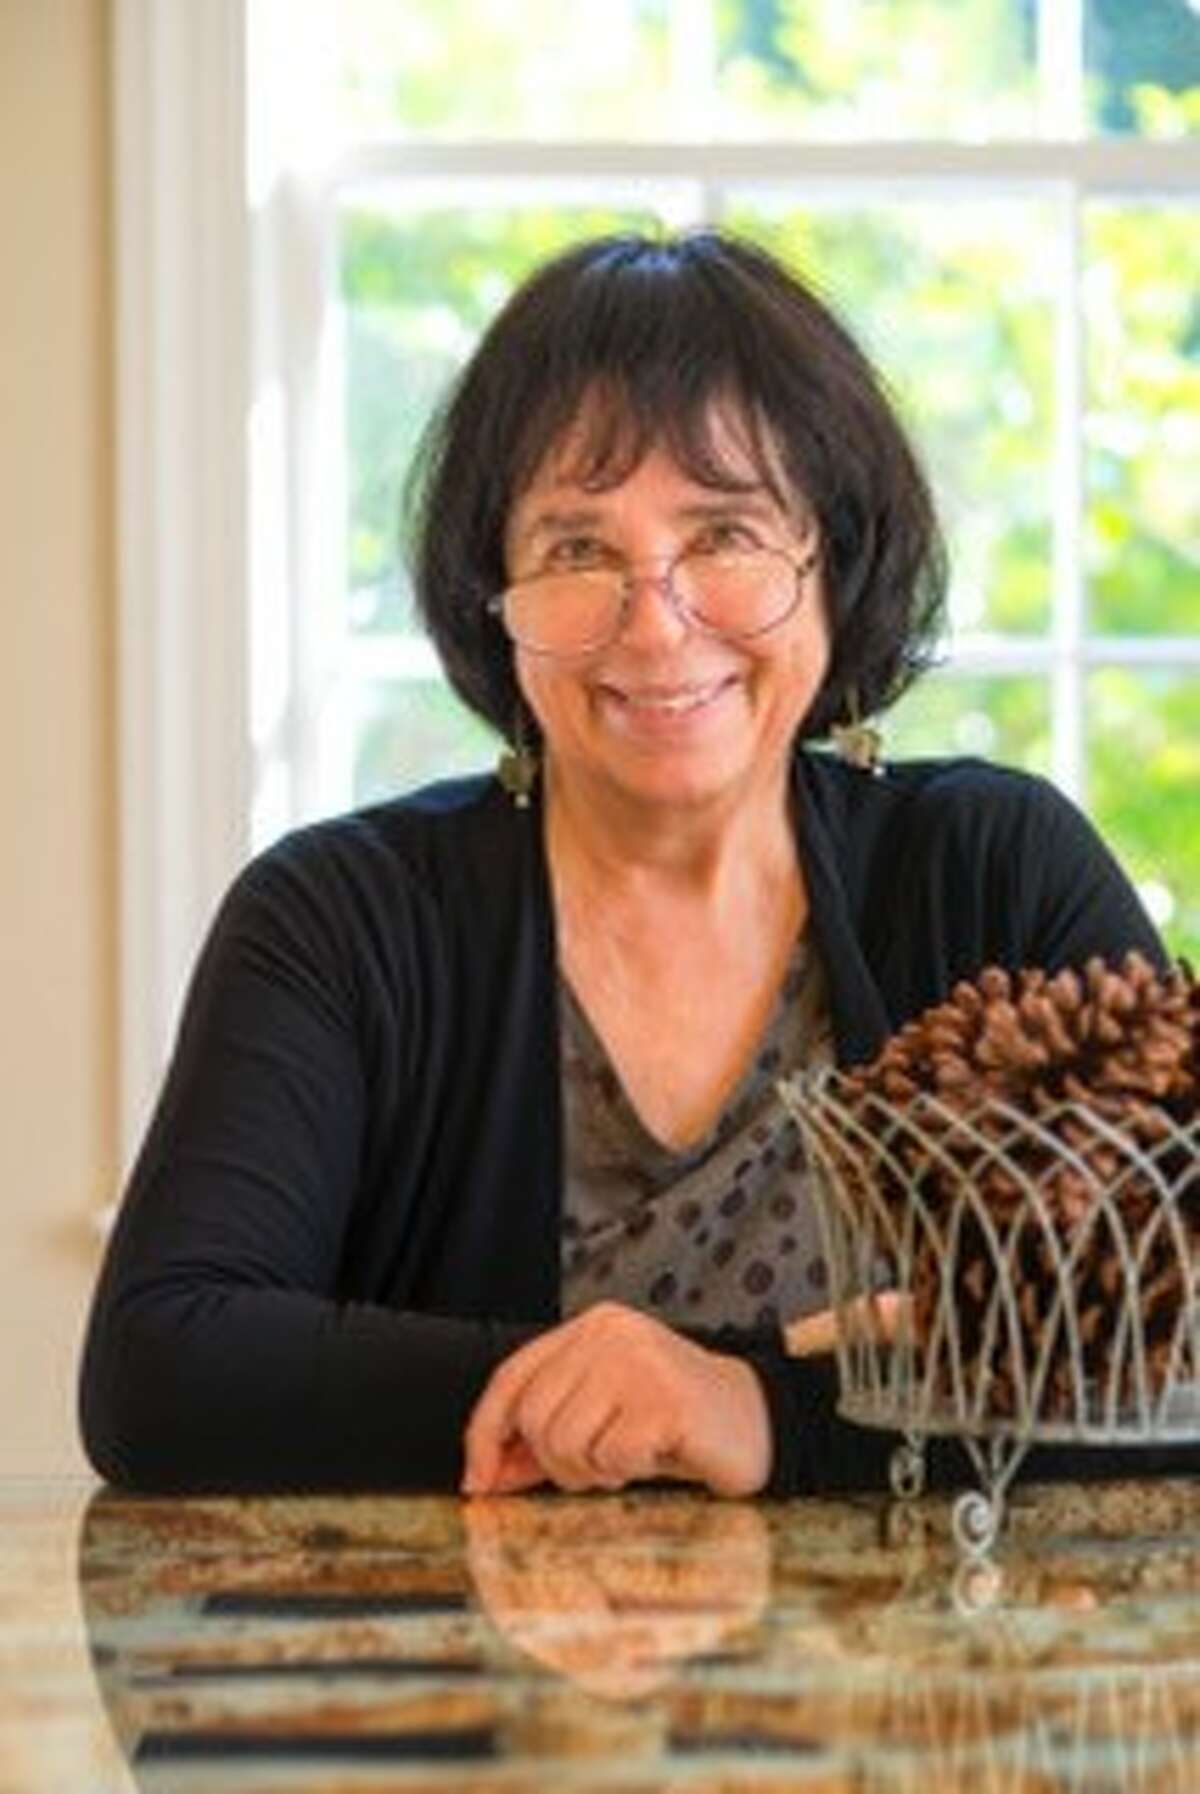 Jane Yolen, a young adult fantasy writer, will appear at the Northshire Book Store in Saratoga Springs on Friday, April 27. (Provided)